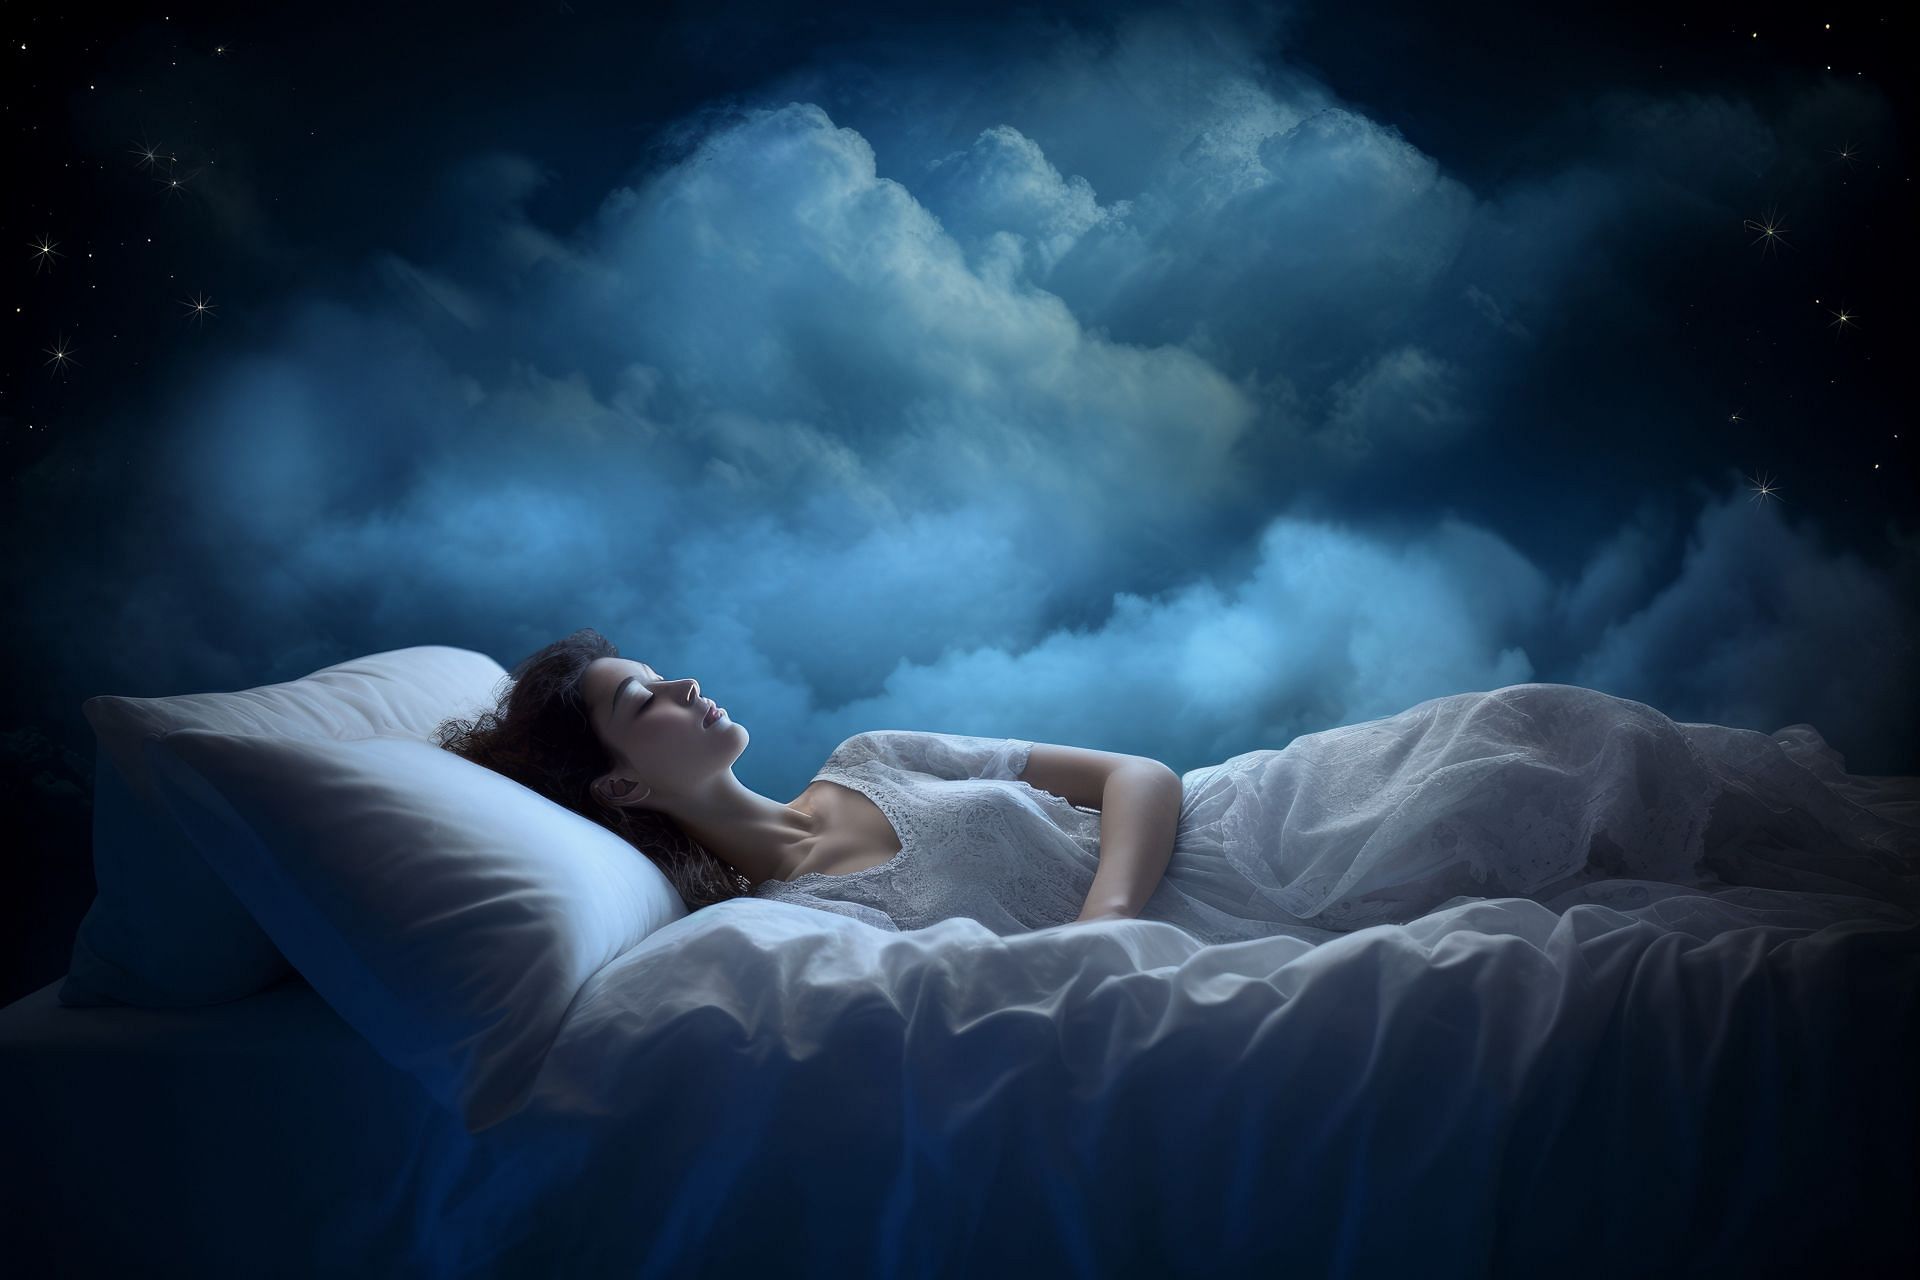 Sleep disorders are an uncomfortable experience all together. (Image via Vecteezy/ juliar0989801338)